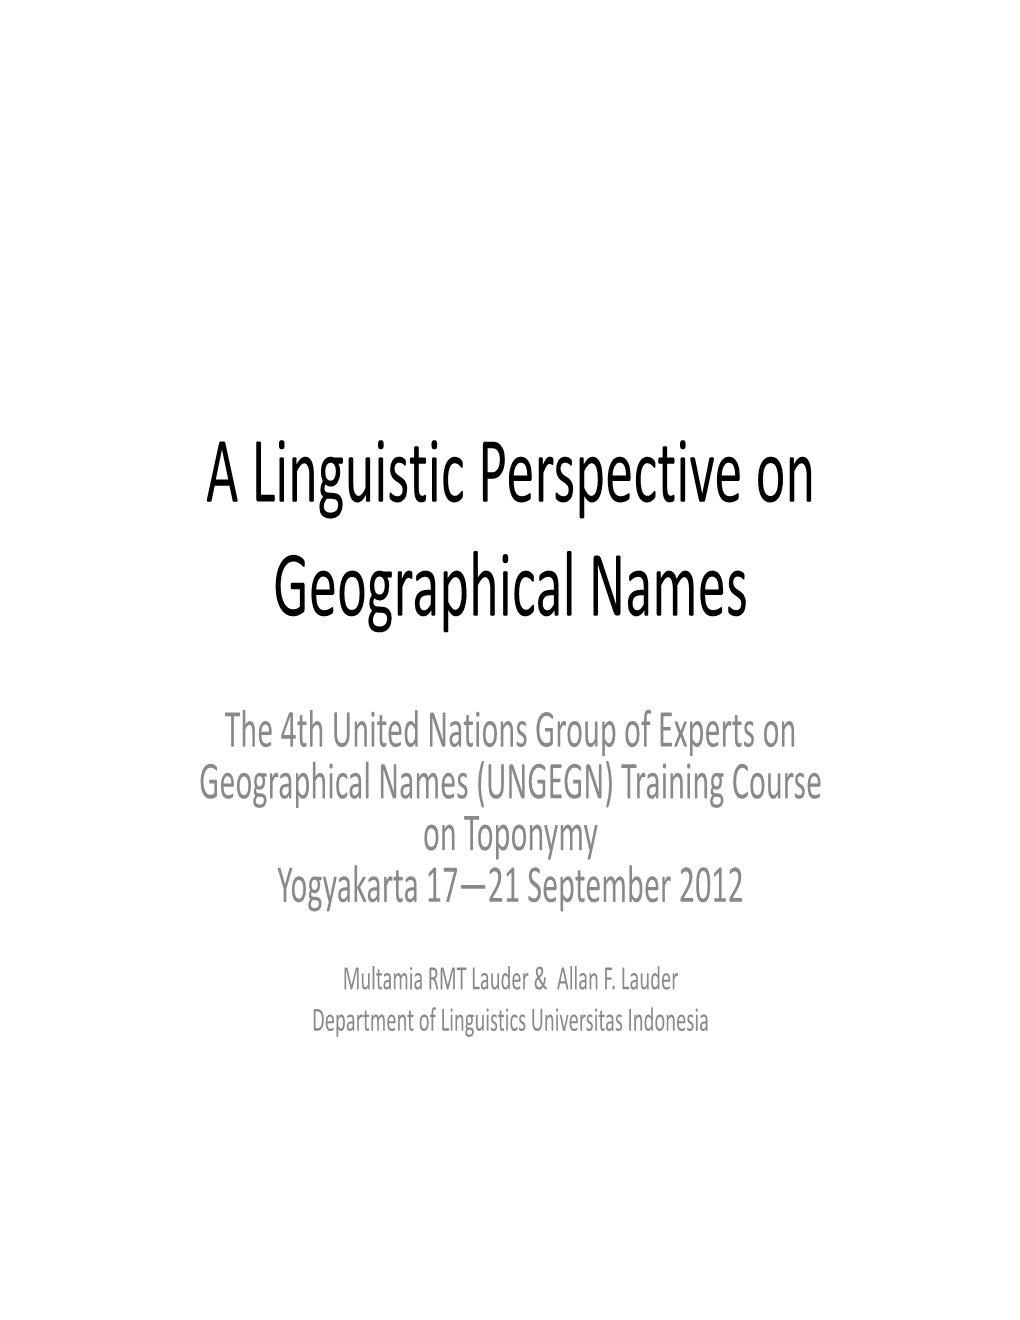 A Linguistic Perspective on Geographical Names